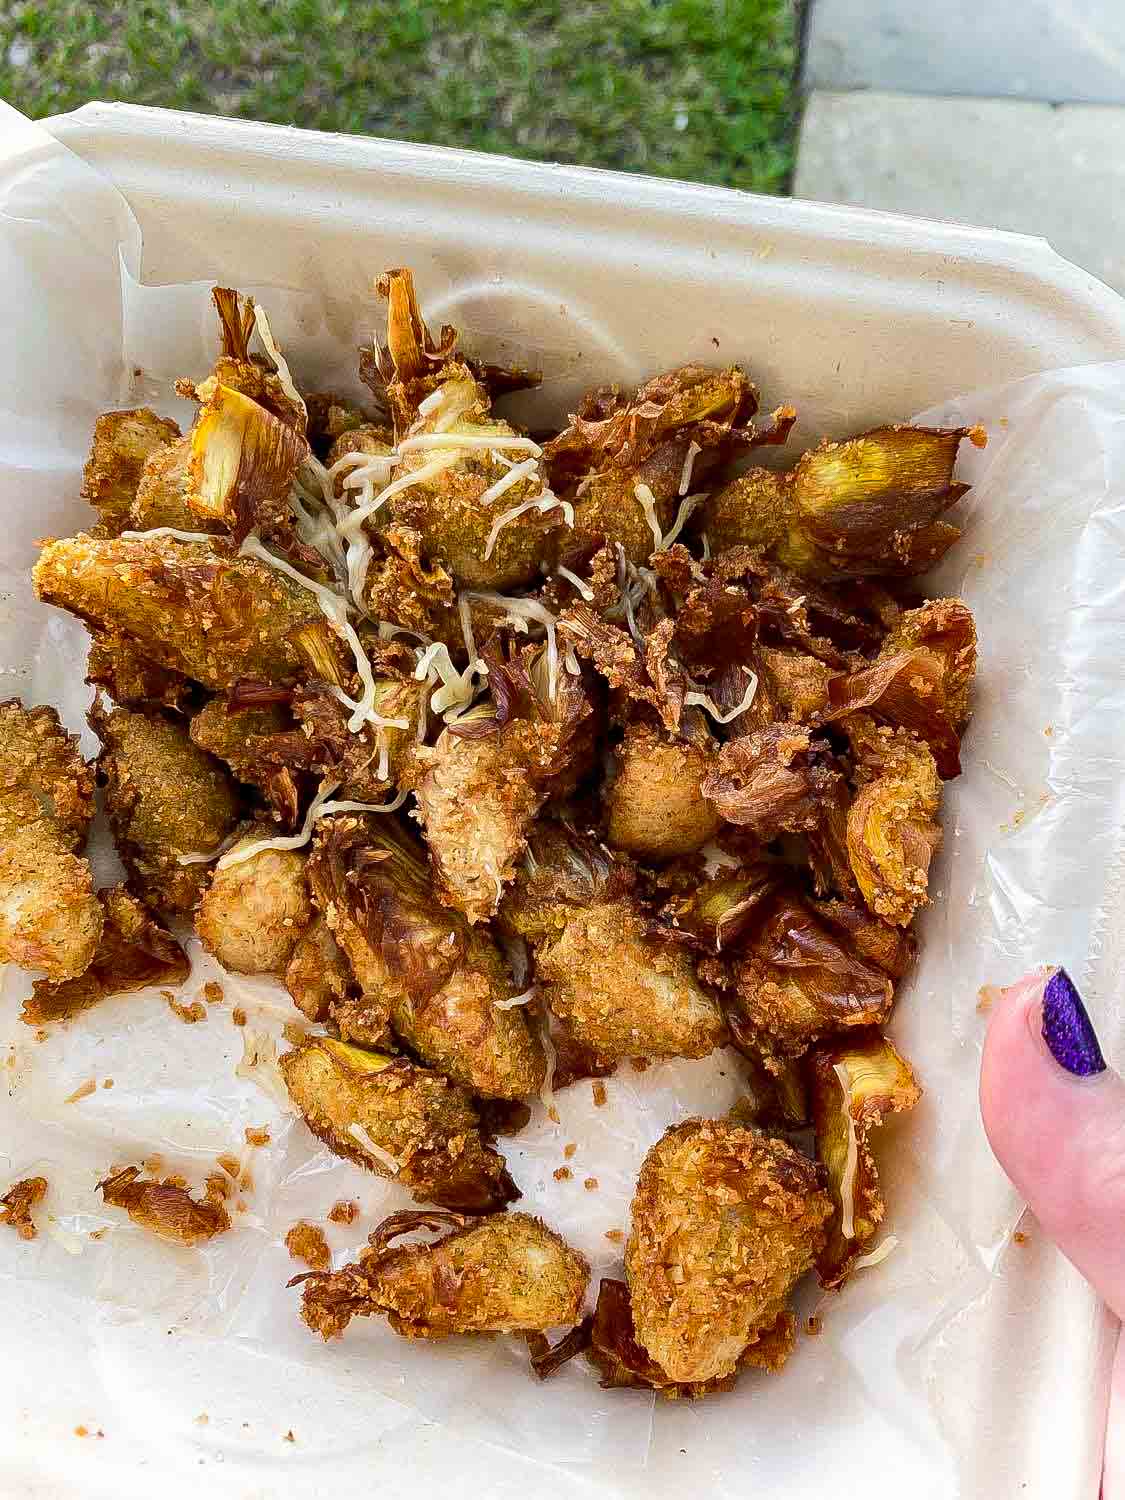 fried artichokes in a styrofoam container